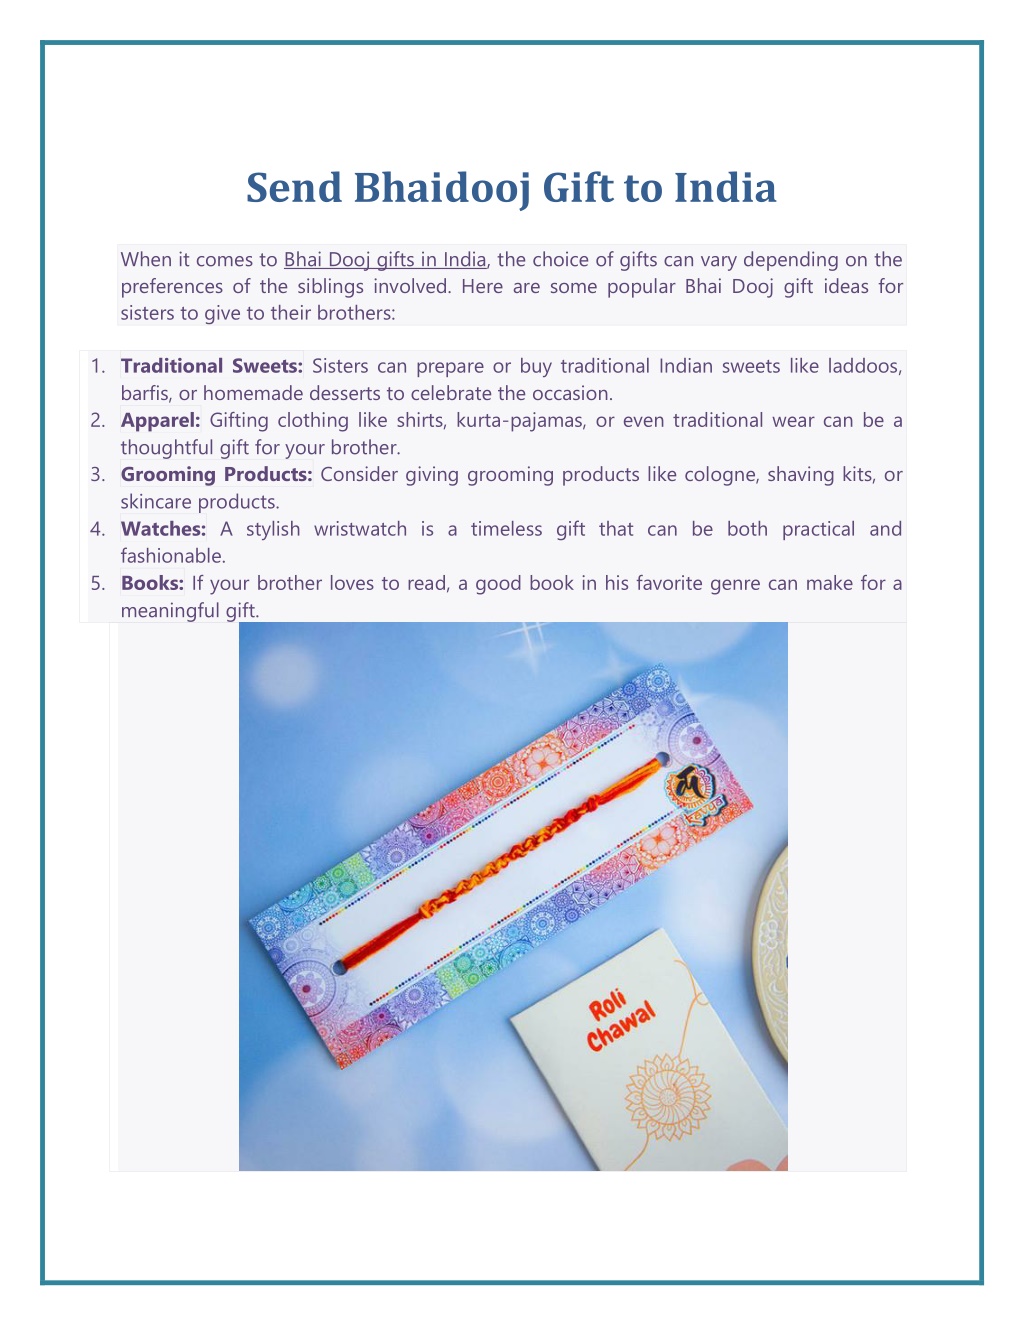 Send Gifts to India | Online Gifts Delivery in India - Rakhi.com